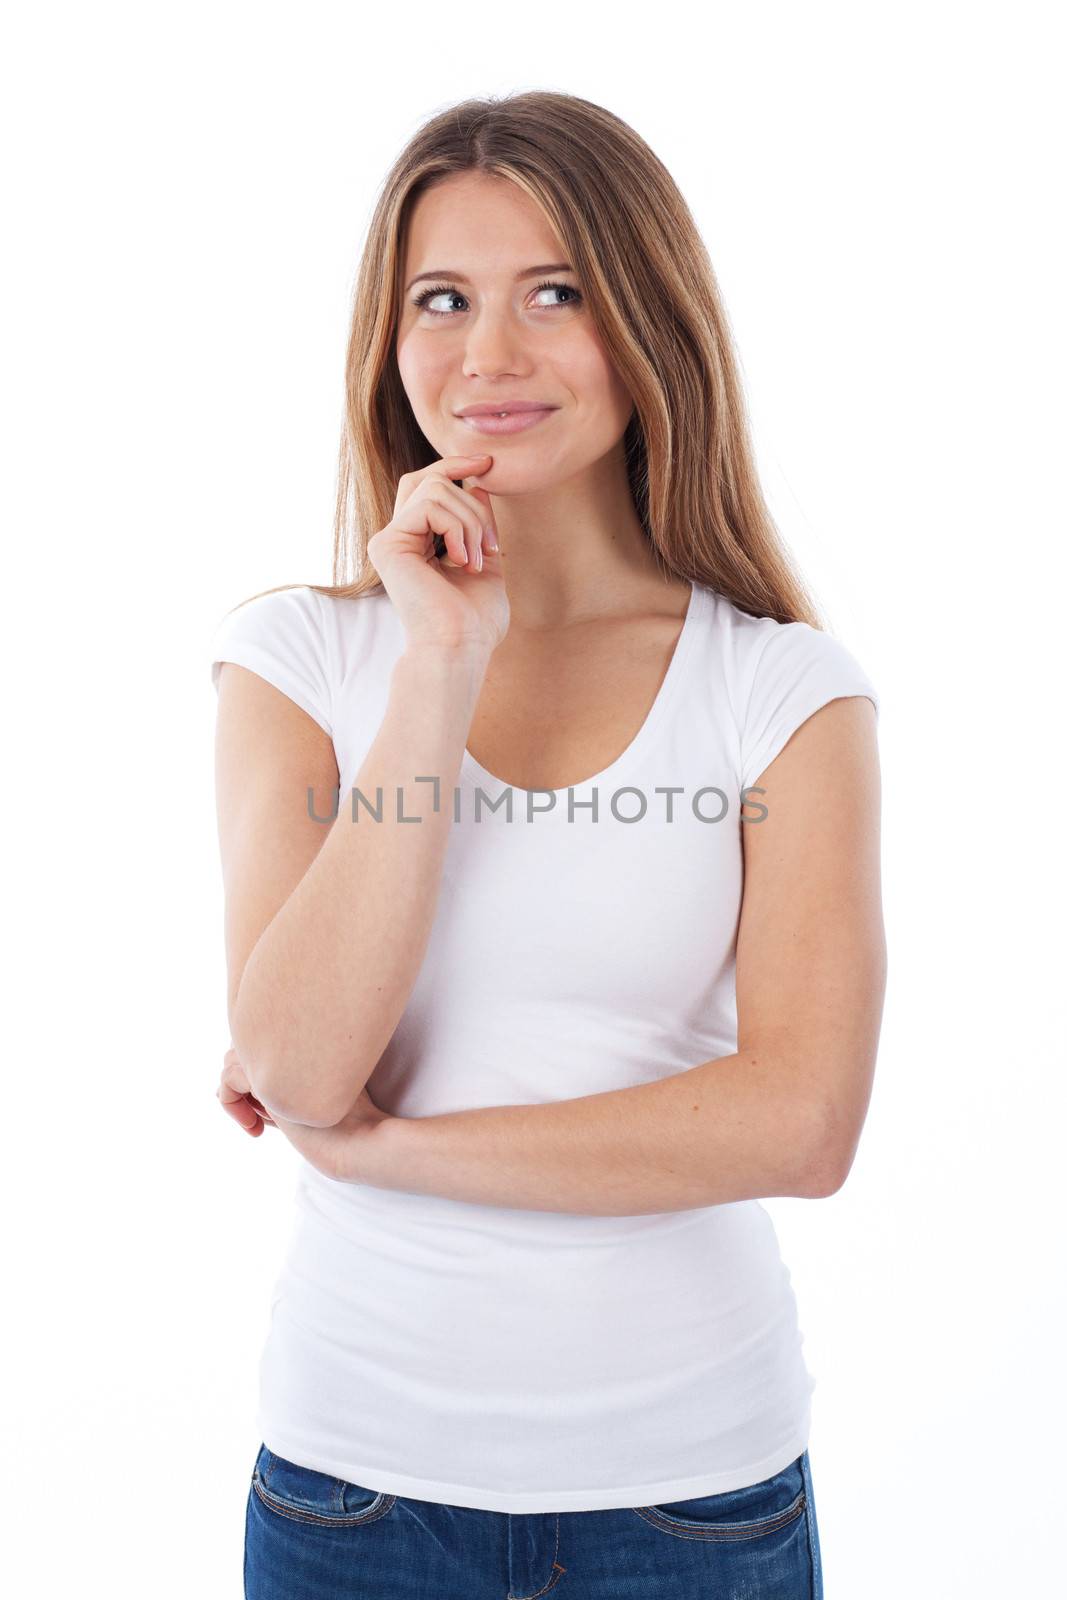 Portrait of a young woman thinking and looking up, isolated on white